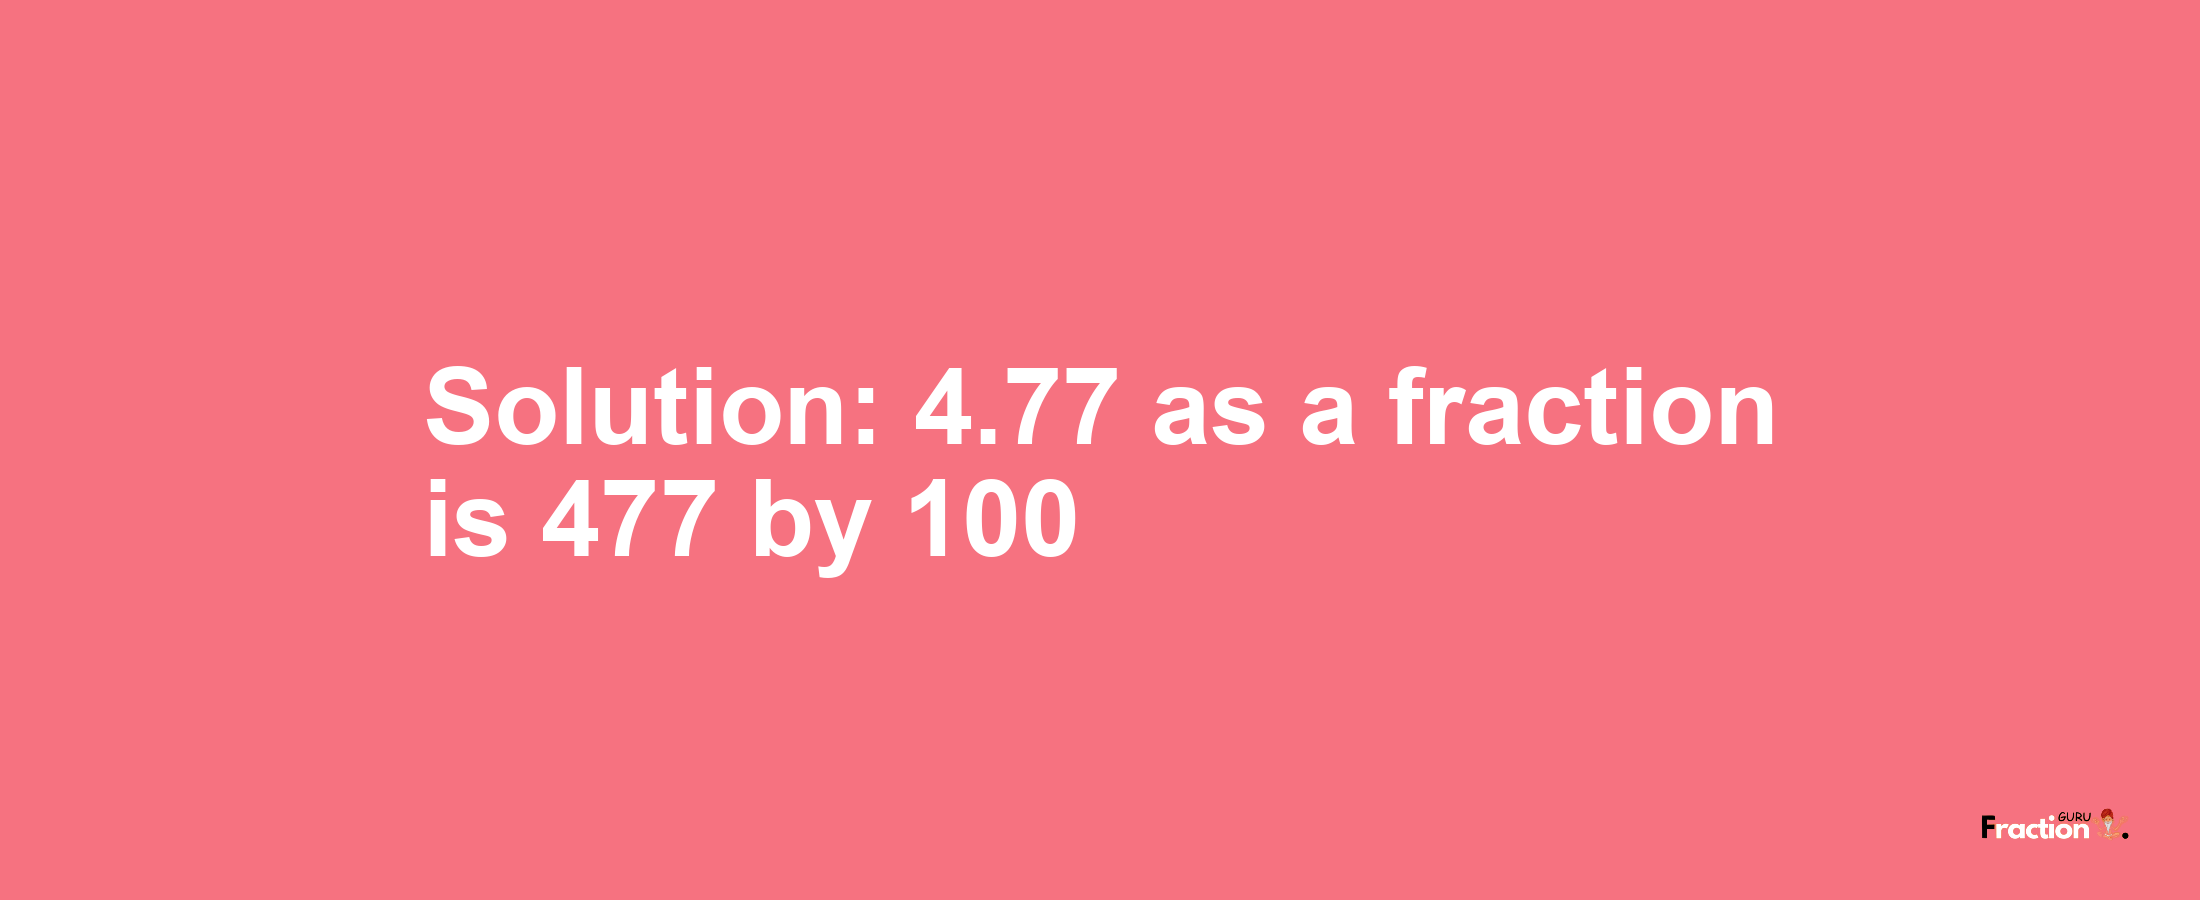 Solution:4.77 as a fraction is 477/100